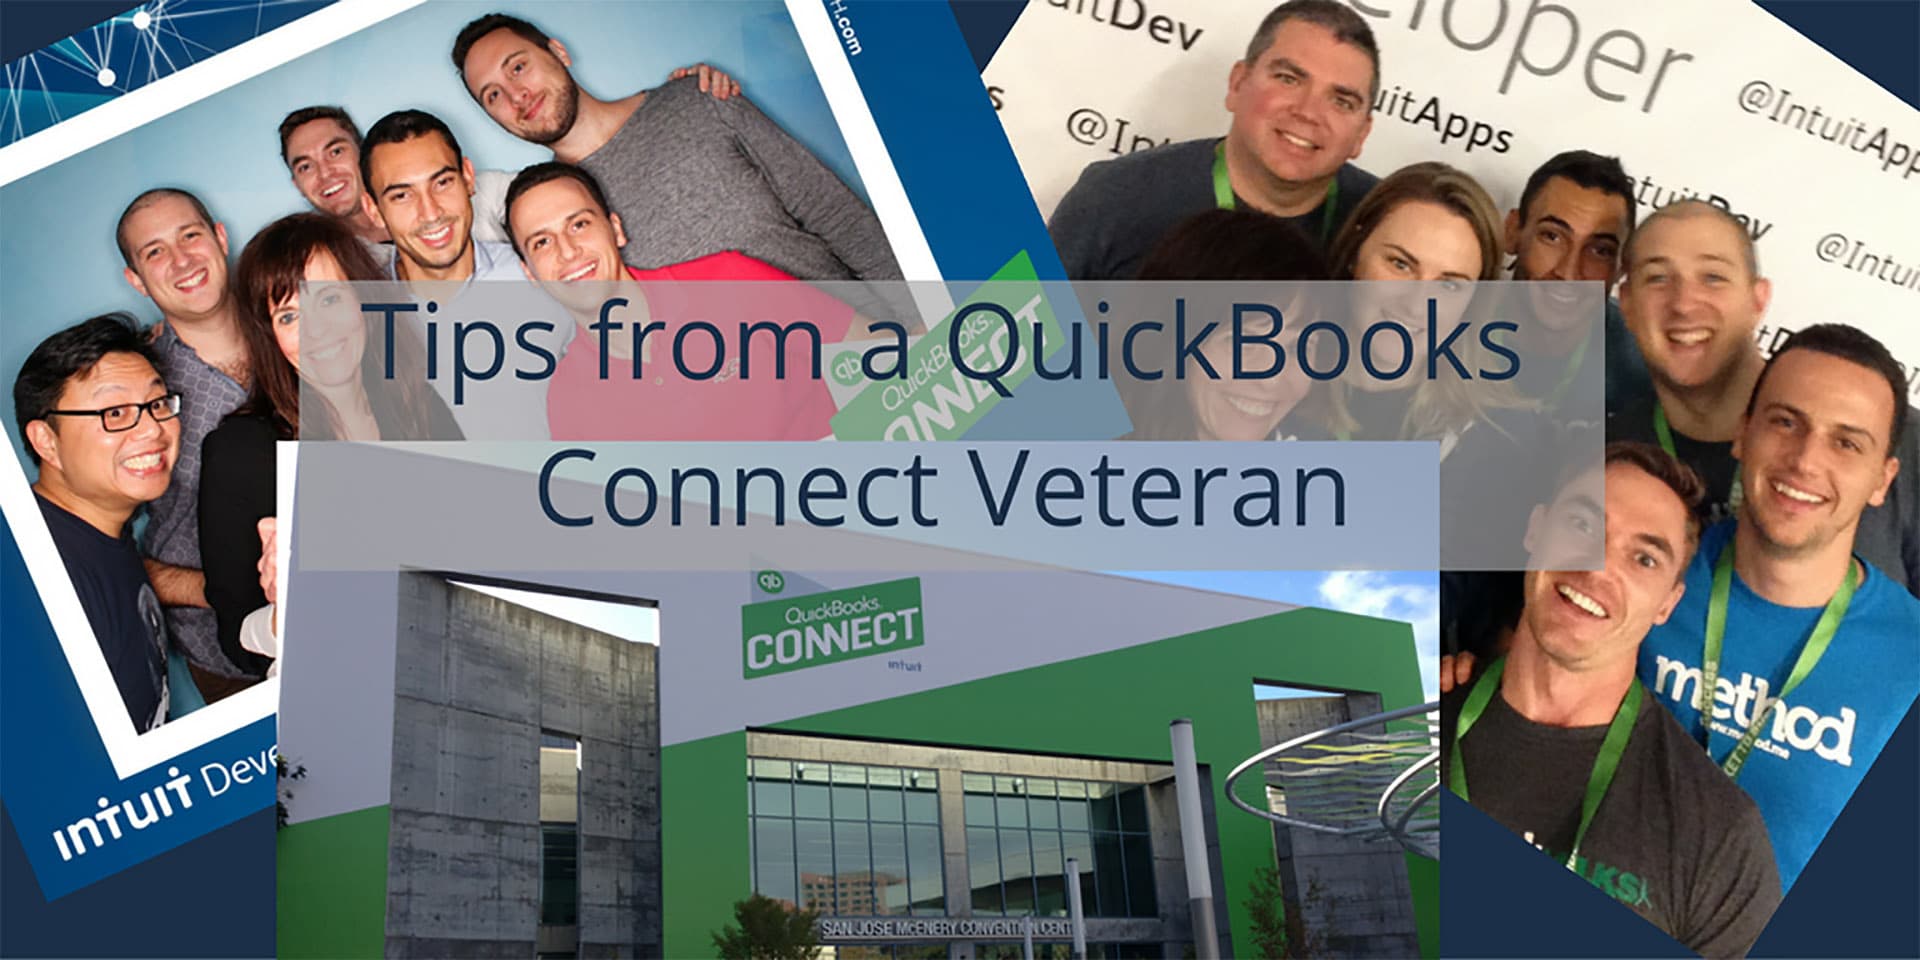 Tips from a QuickBooks Connect Veteran.  How to make the most of your time at QB Connect 2016.